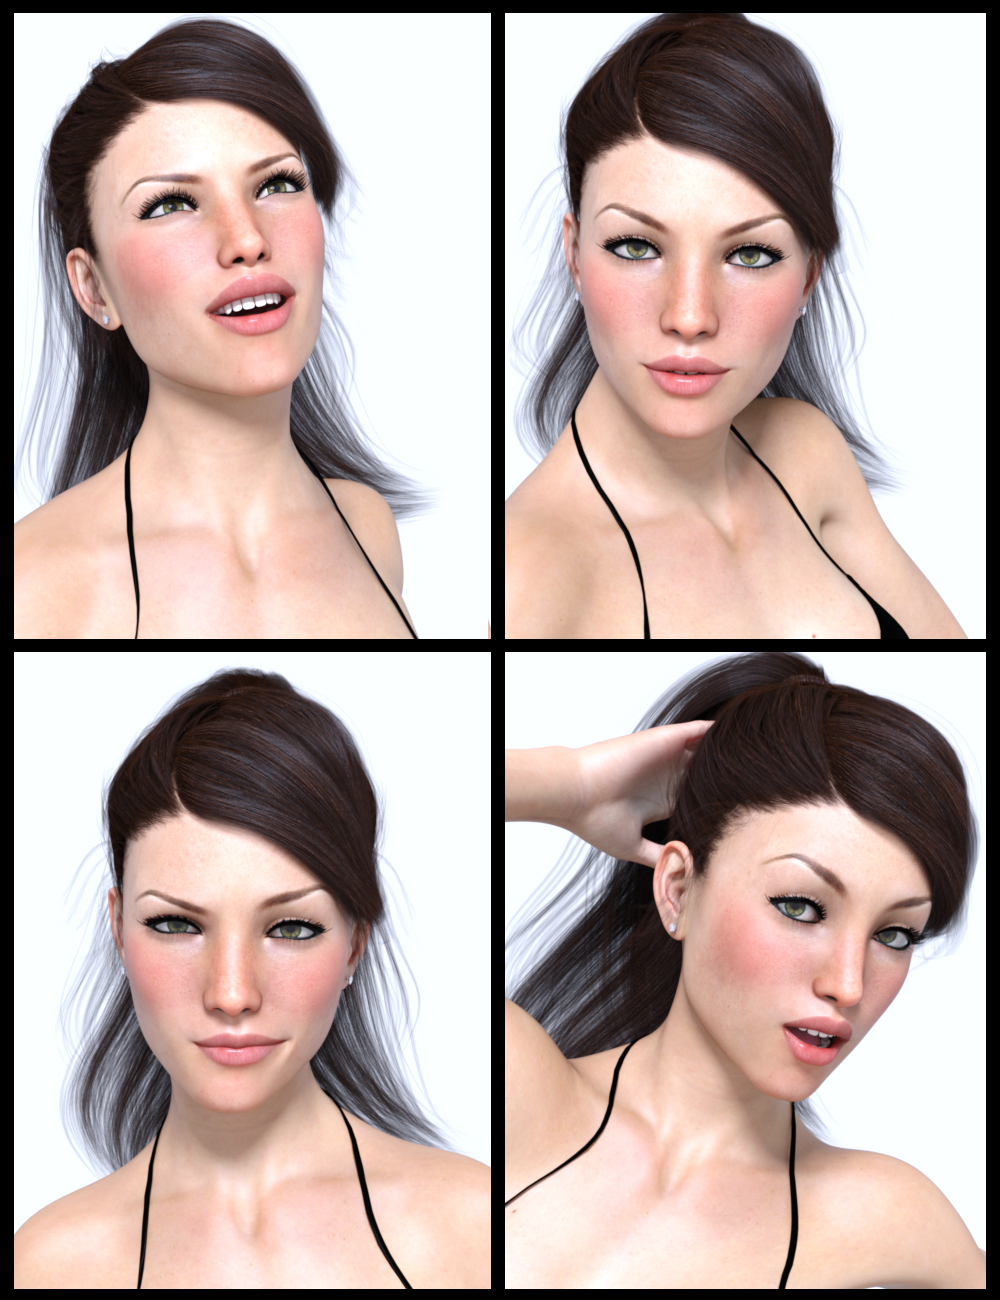 Details for Genesis 3 Female(s) by: lunchlady, 3D Models by Daz 3D